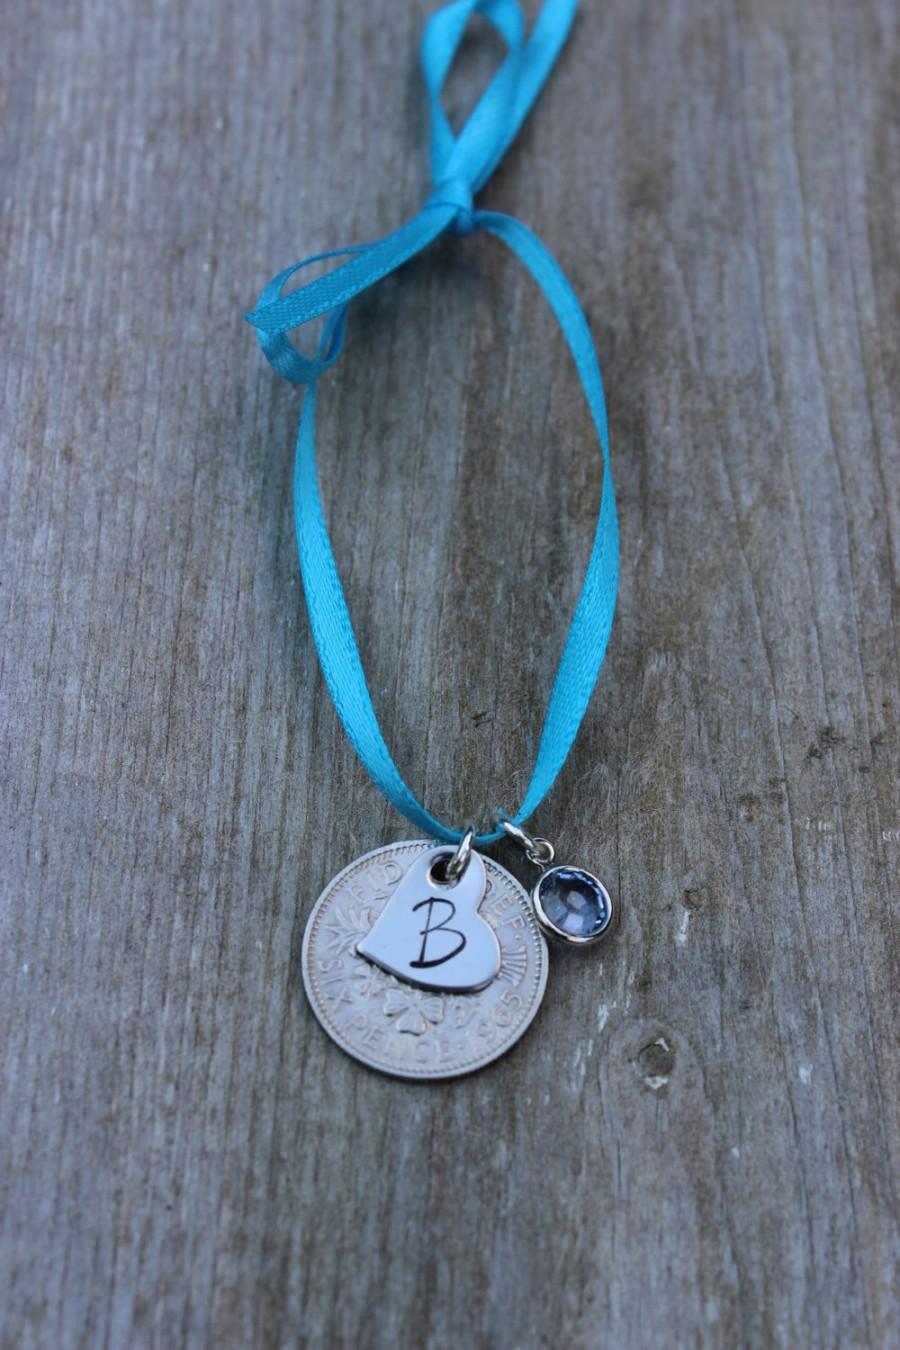 Hochzeit - Silver Sixpence for Bride - Sixpence in her Shoe - Sixpence Gift for Bride with Blue Swarovski Crystal and Stamped Heart Charm